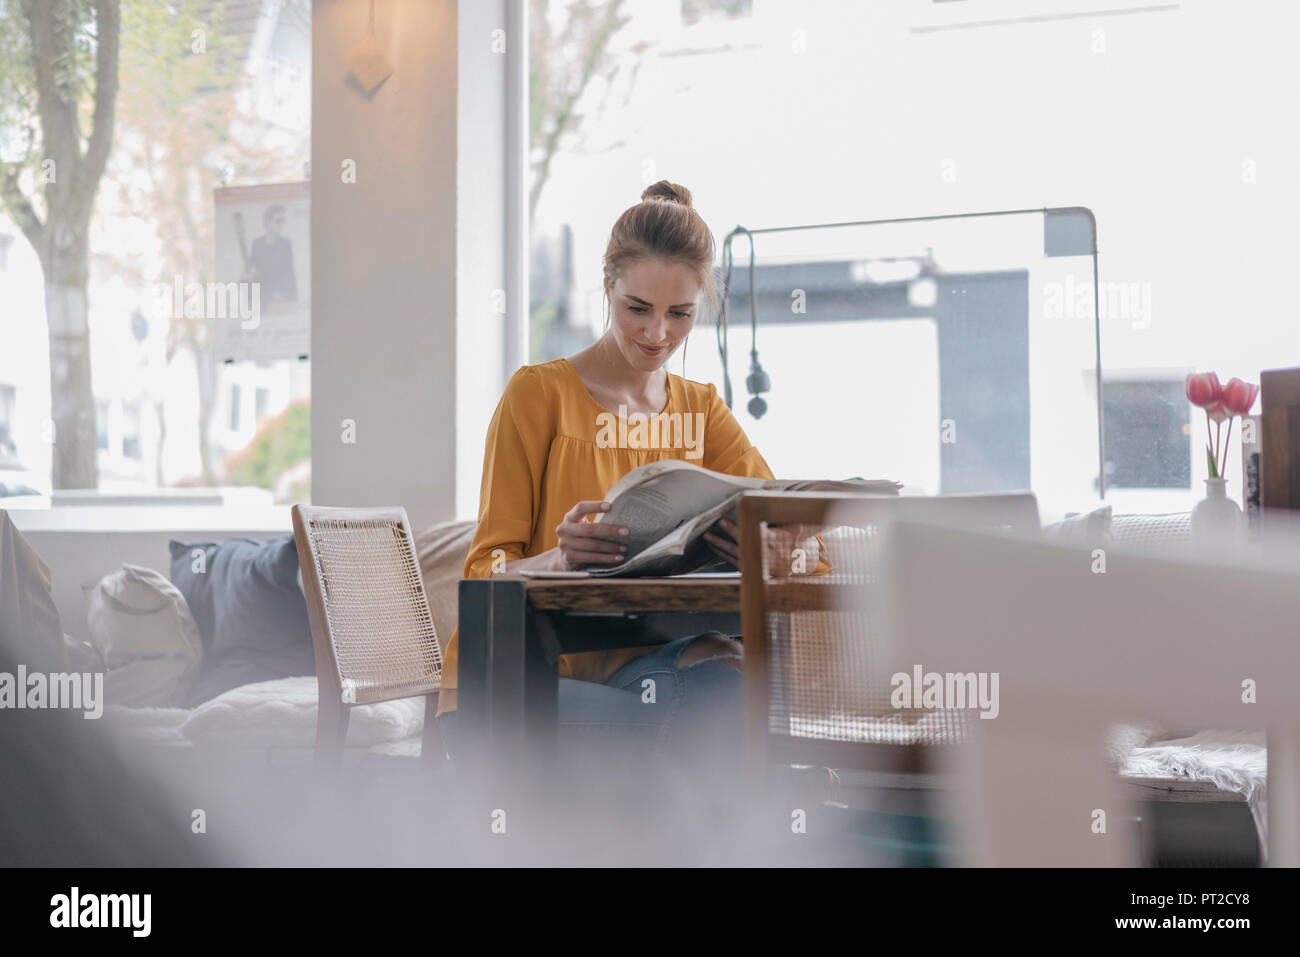 Young woman sitting in coworking space, reading newspaper Stock Photo